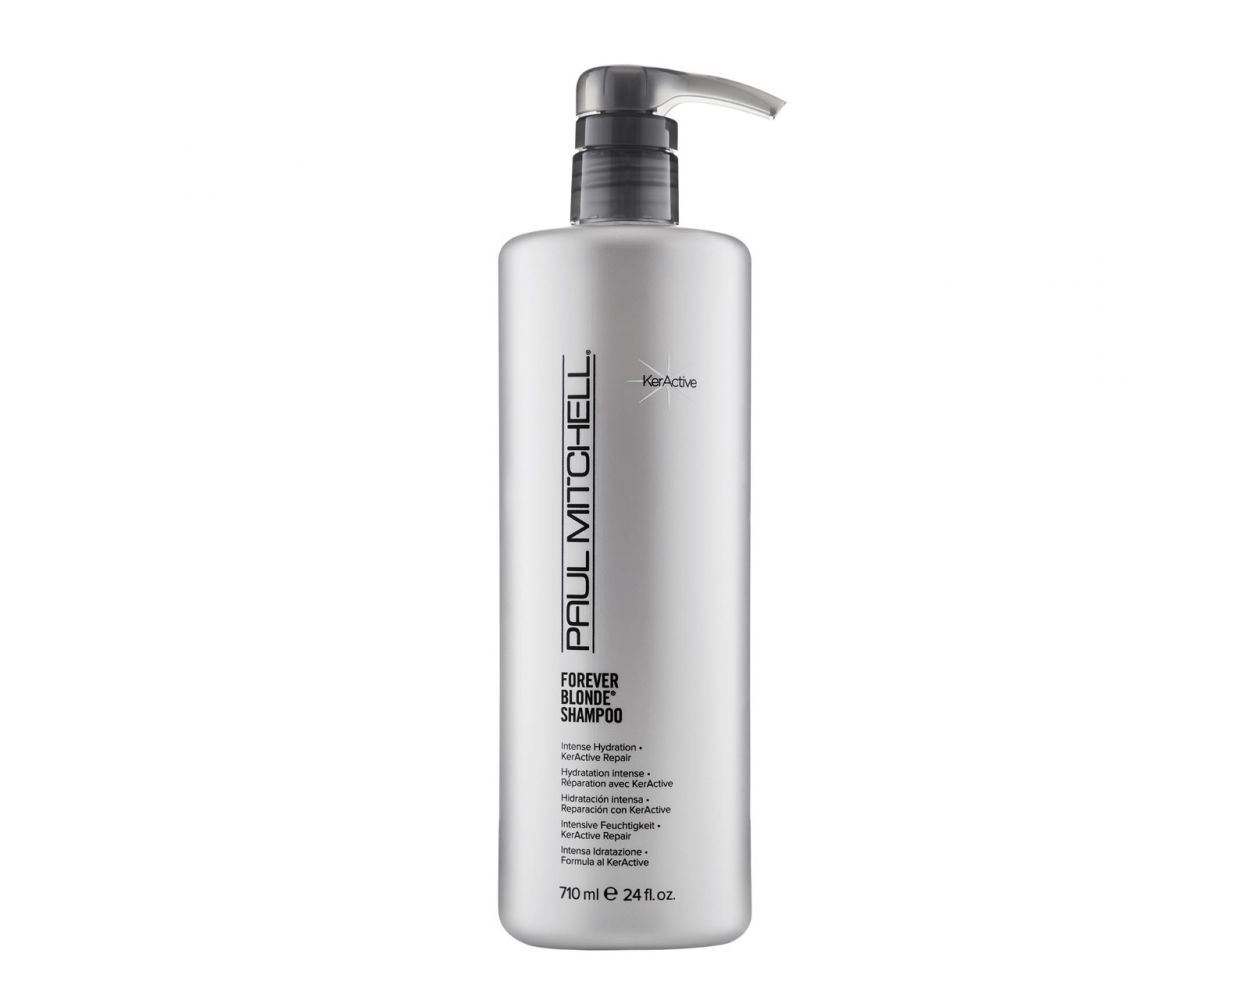 Paul Mitchell Forever Blonde Shampoo - Exquisite Laser Clinic